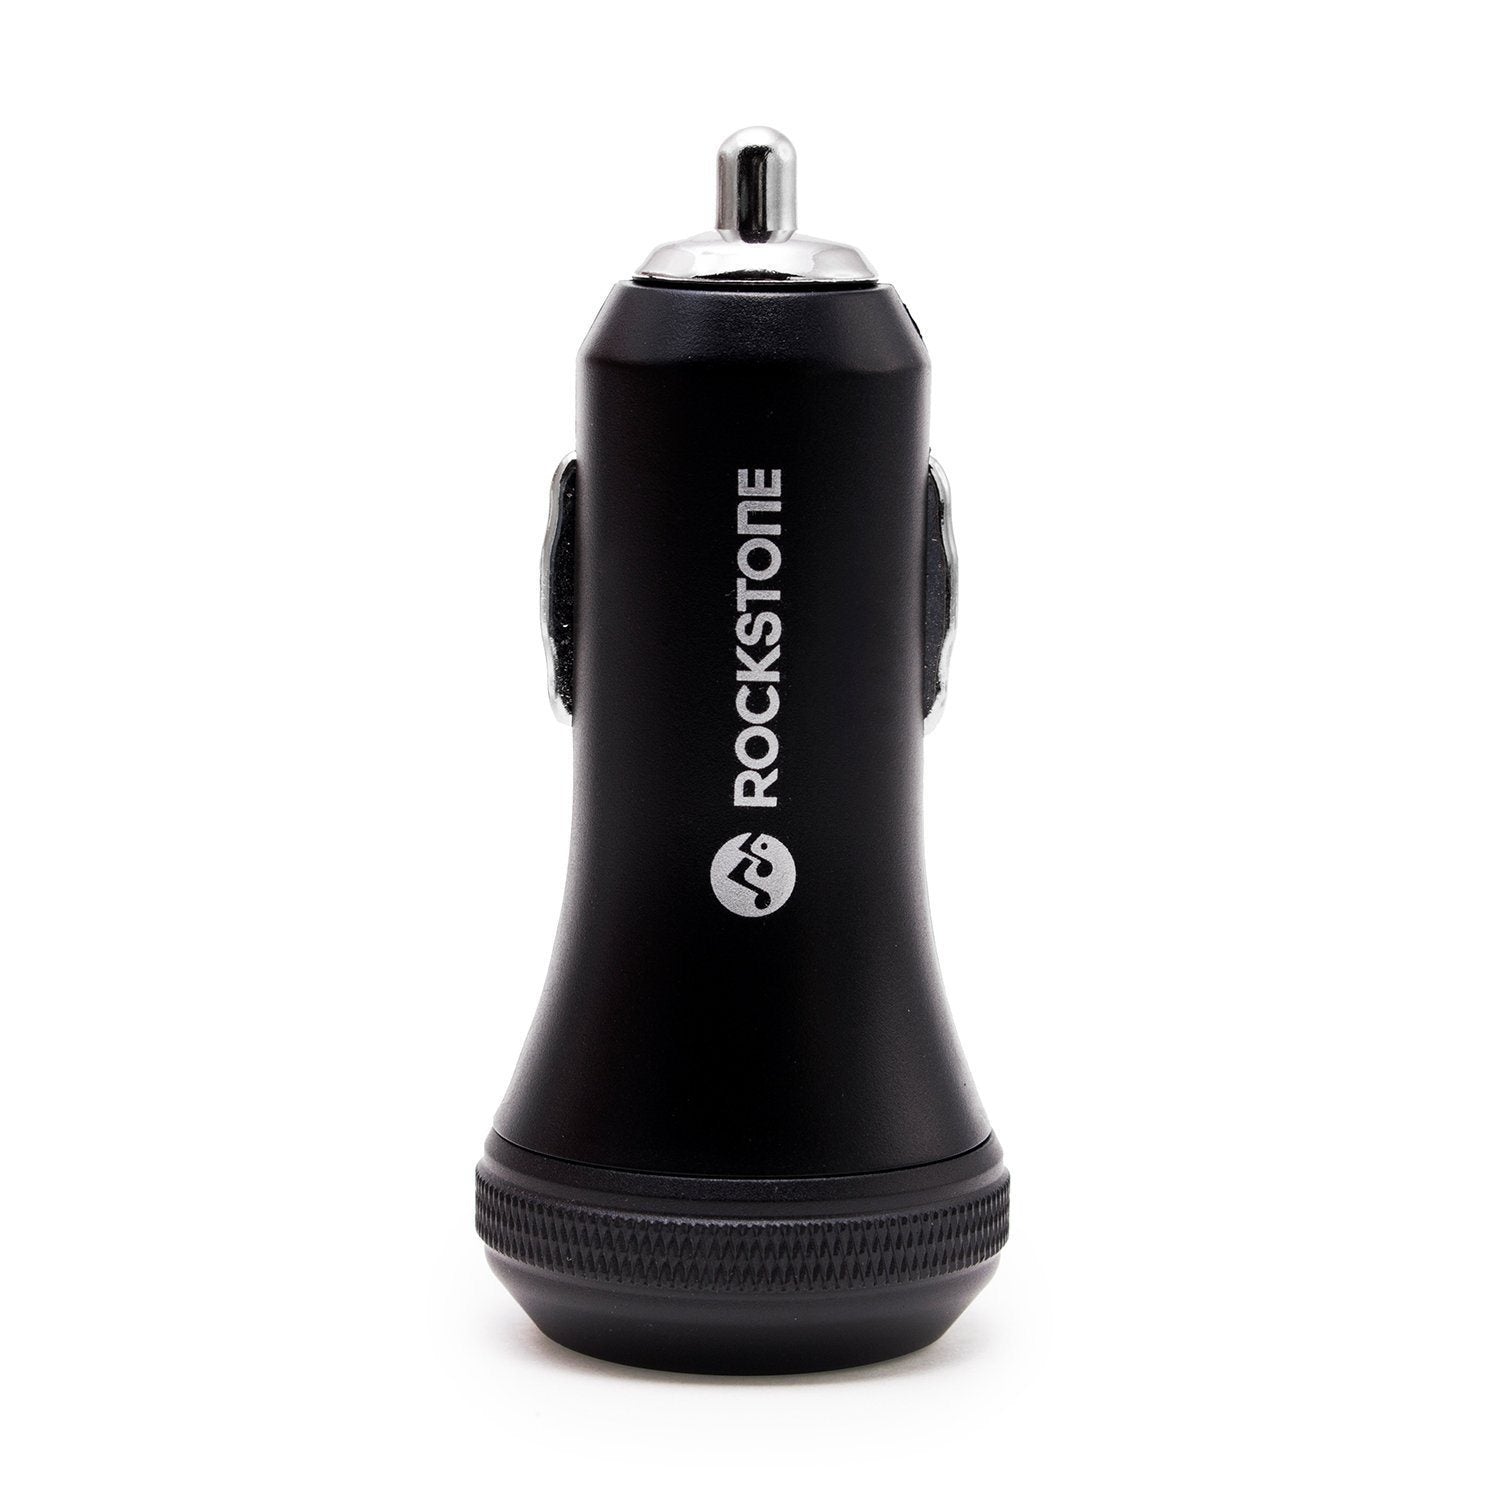 Rockstone Car USB Charger with 2 port 4.8Amp Fast Charge Car Charger Rockstone 